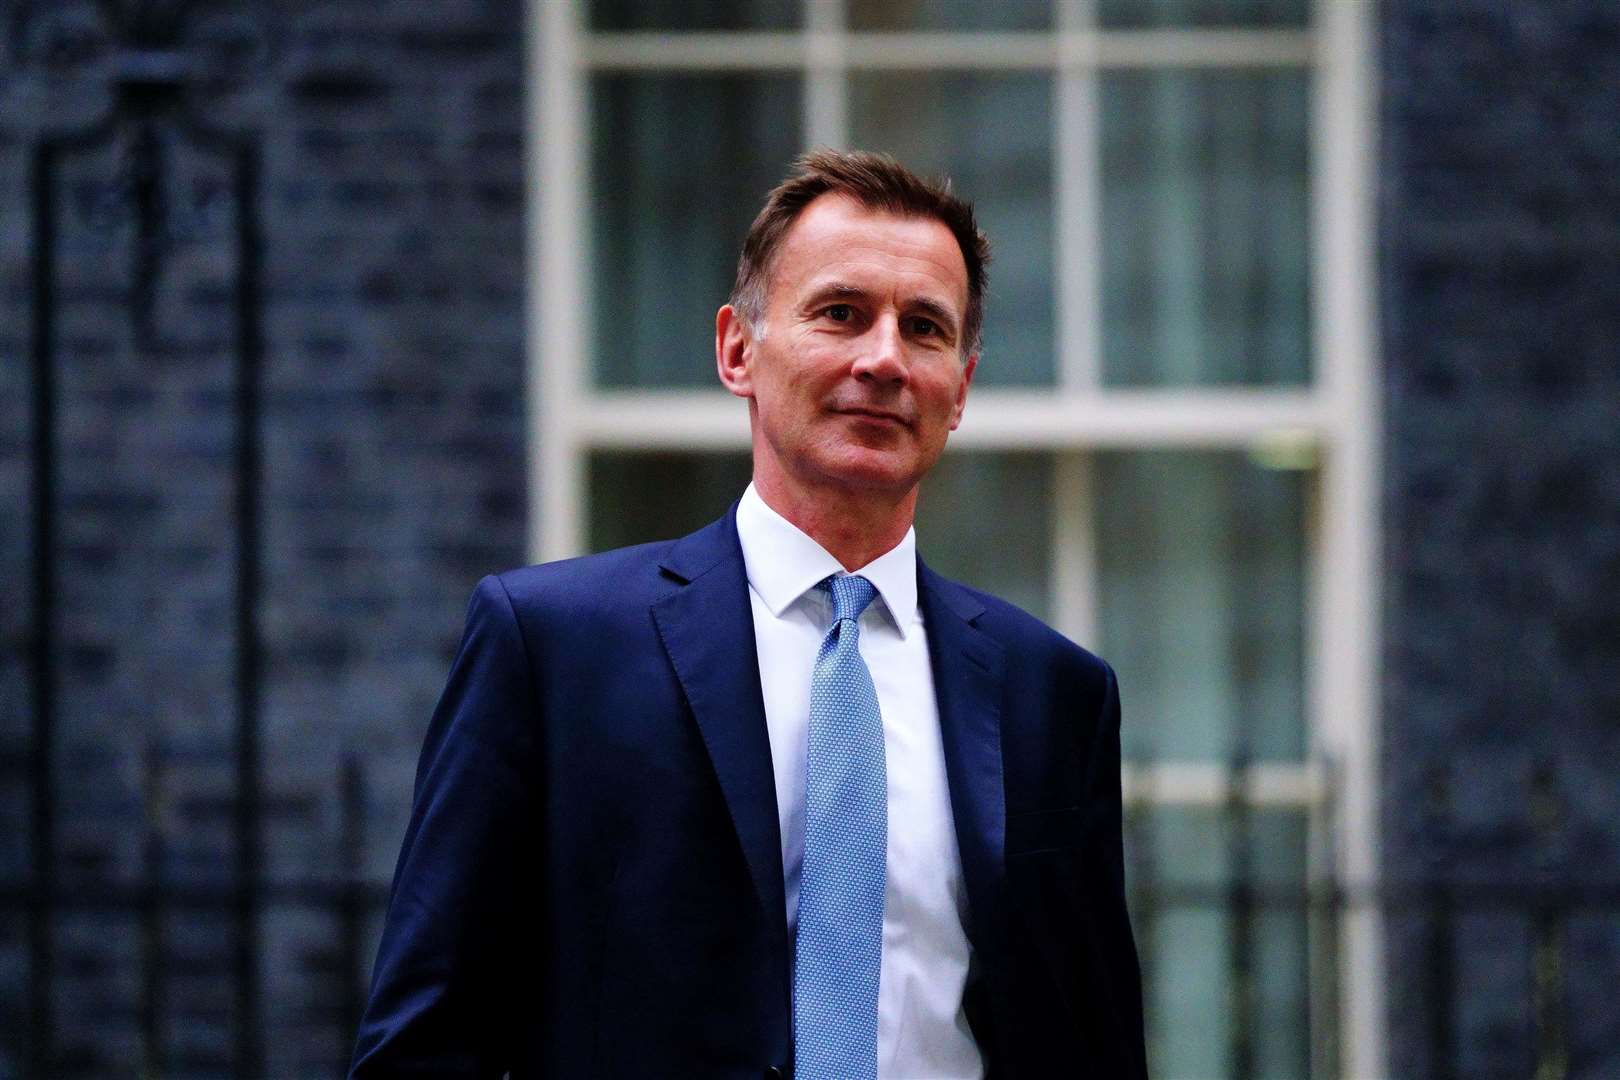 Chancellor Jeremy Hunt announced tens of billions of pounds worth of spending cuts and tax rises